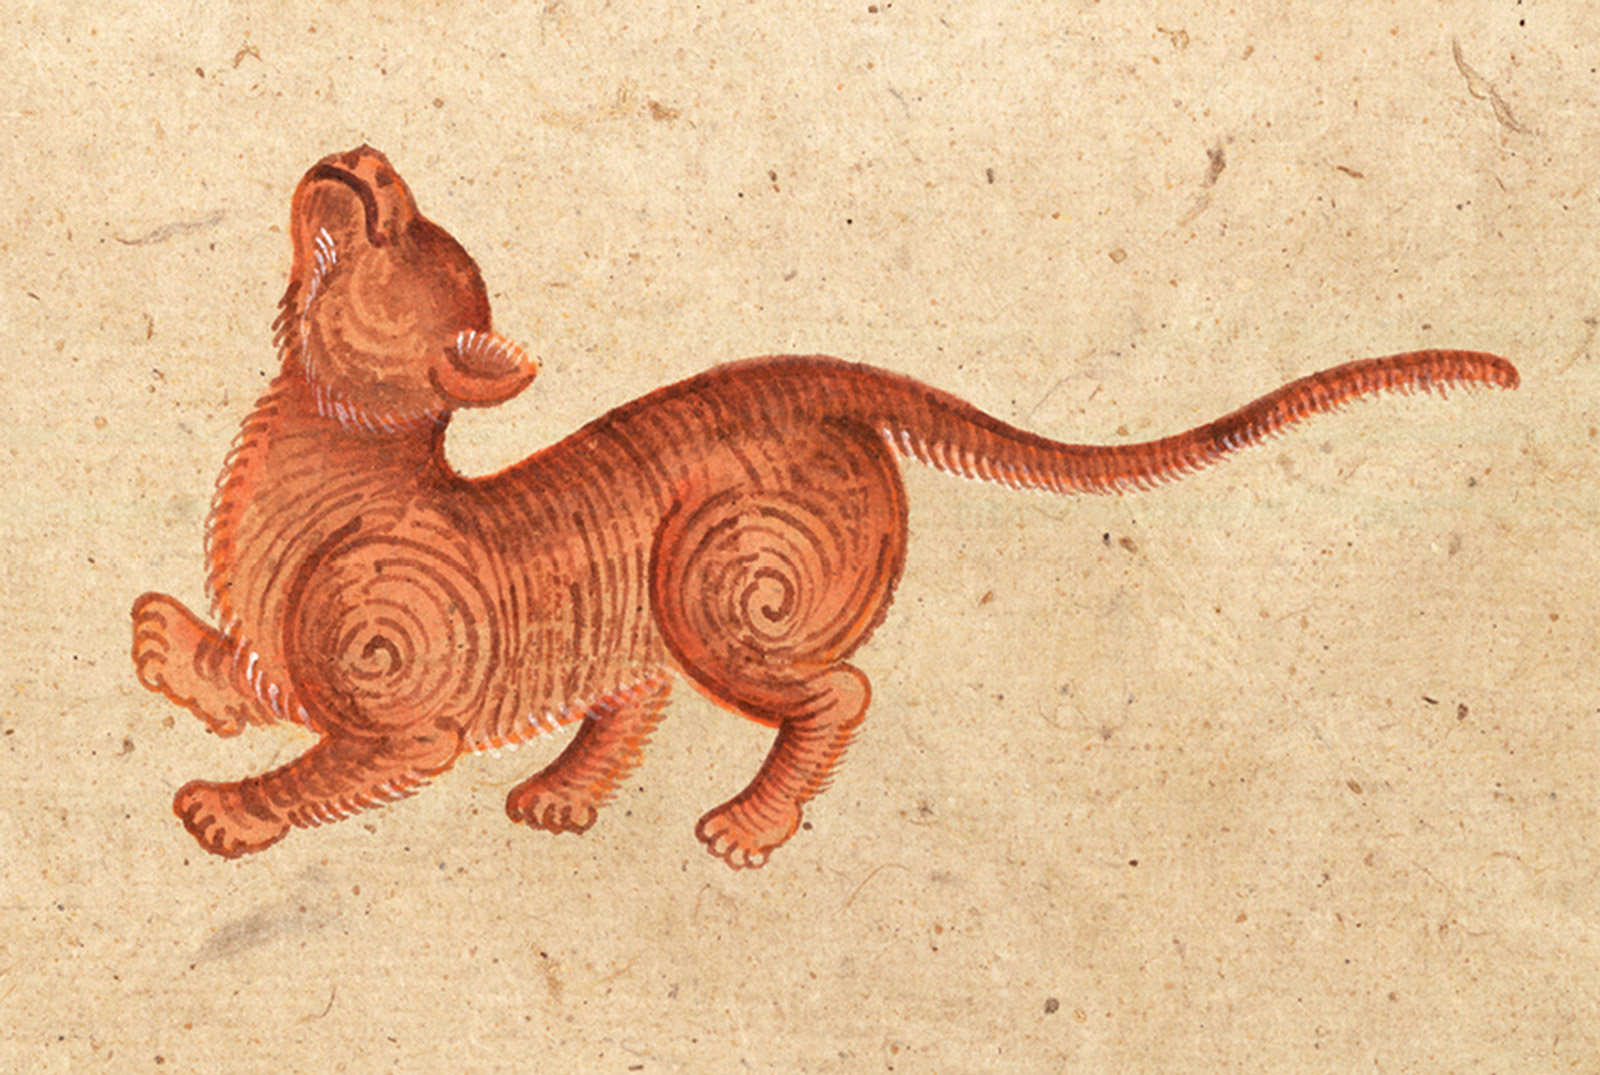 An illustration of a Suphalak (Excellence) or Thong Daeng (Copper) cat from a mid-nineteenth-century manuscript titled “Tamra Maew.” The accompanying caption reads: “Of appearance superb, a graceful feline.
Color of copper glinting,
Eyes lit like shining rays
Against all evil, malevolence turns to content.”